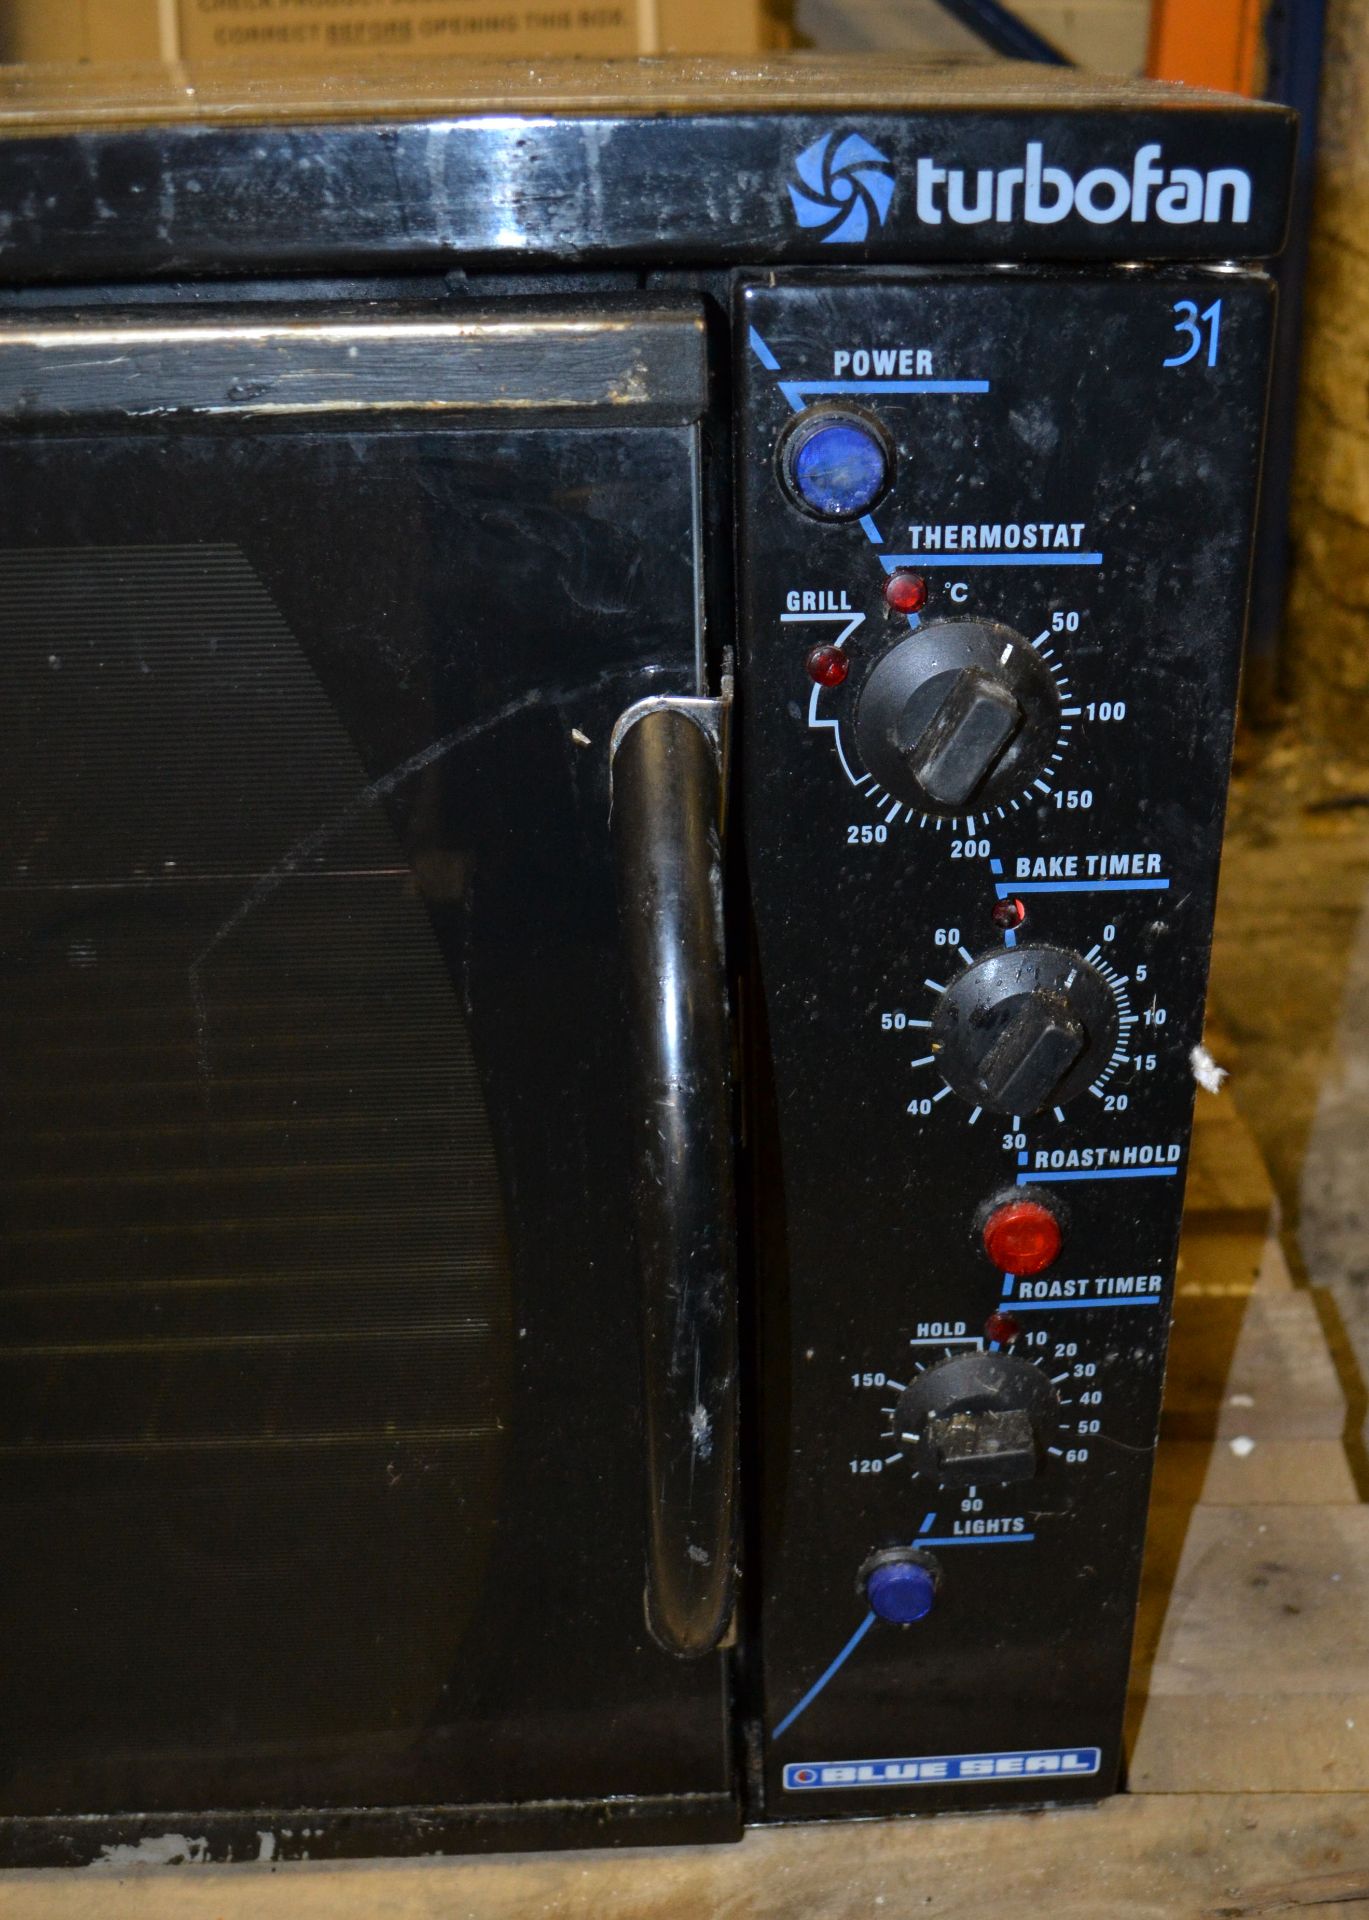 1 x Blue Seal E31 Turbofan Convection Oven - Ref: FJC012 - CL124 - Location: Bolton BL1 - Used - Image 7 of 7